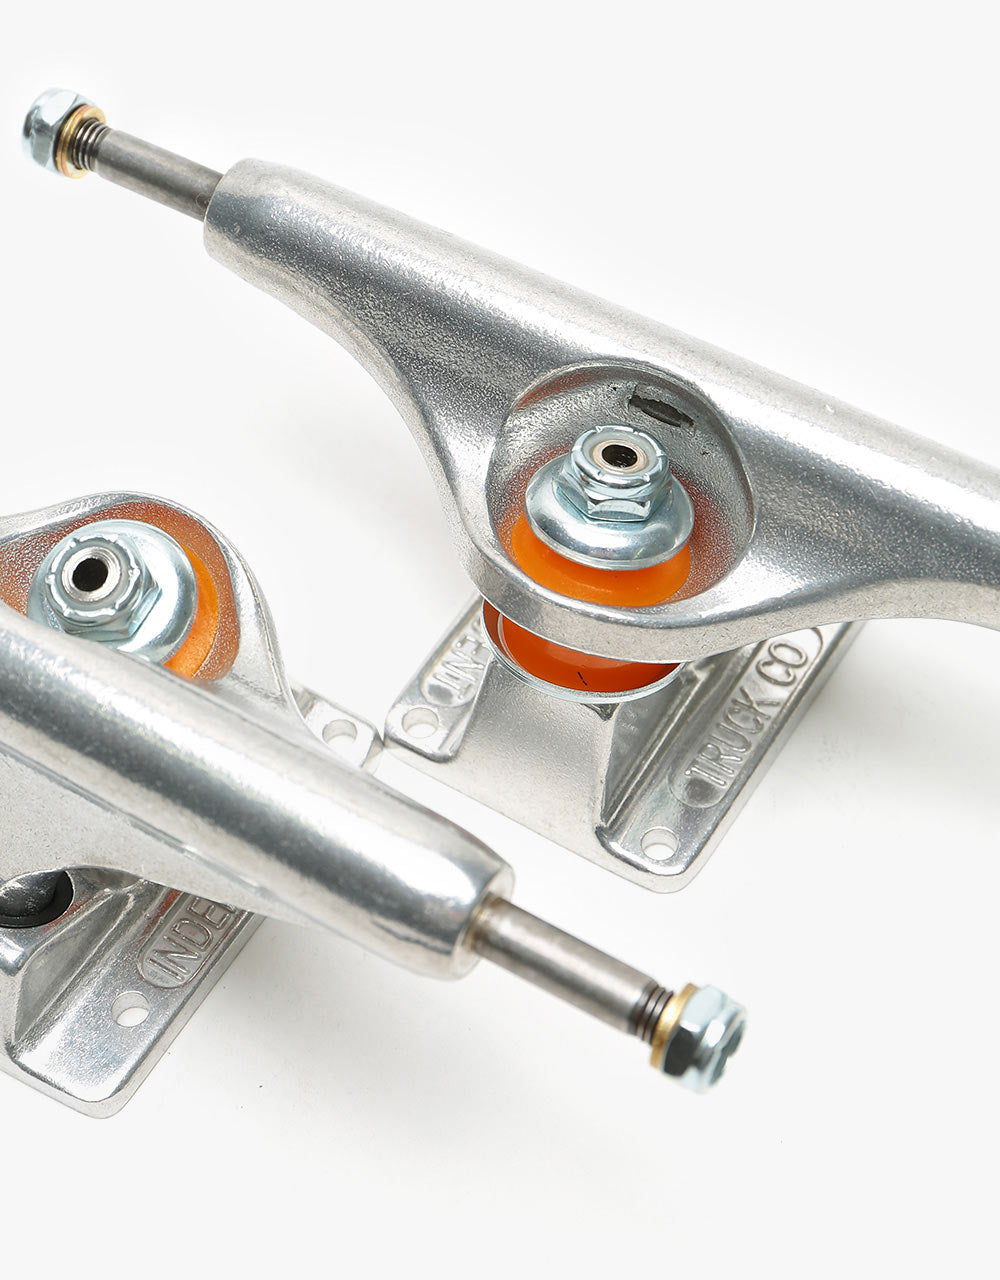 Independent Stage 11 Hollow Forged 149 Standard Trucks (Pair)